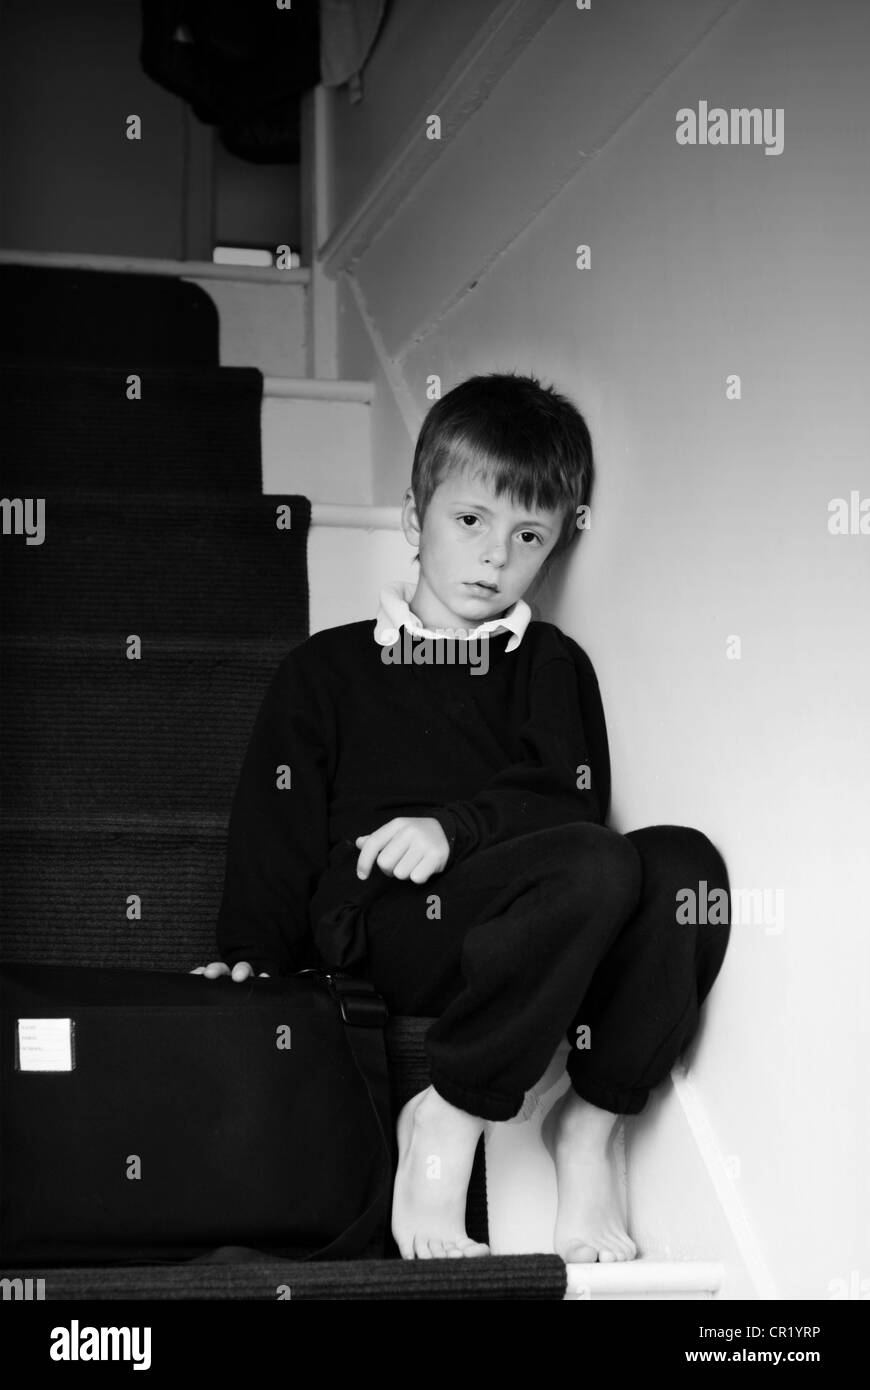 Lonely child sitting on the stairs. Stock Photo